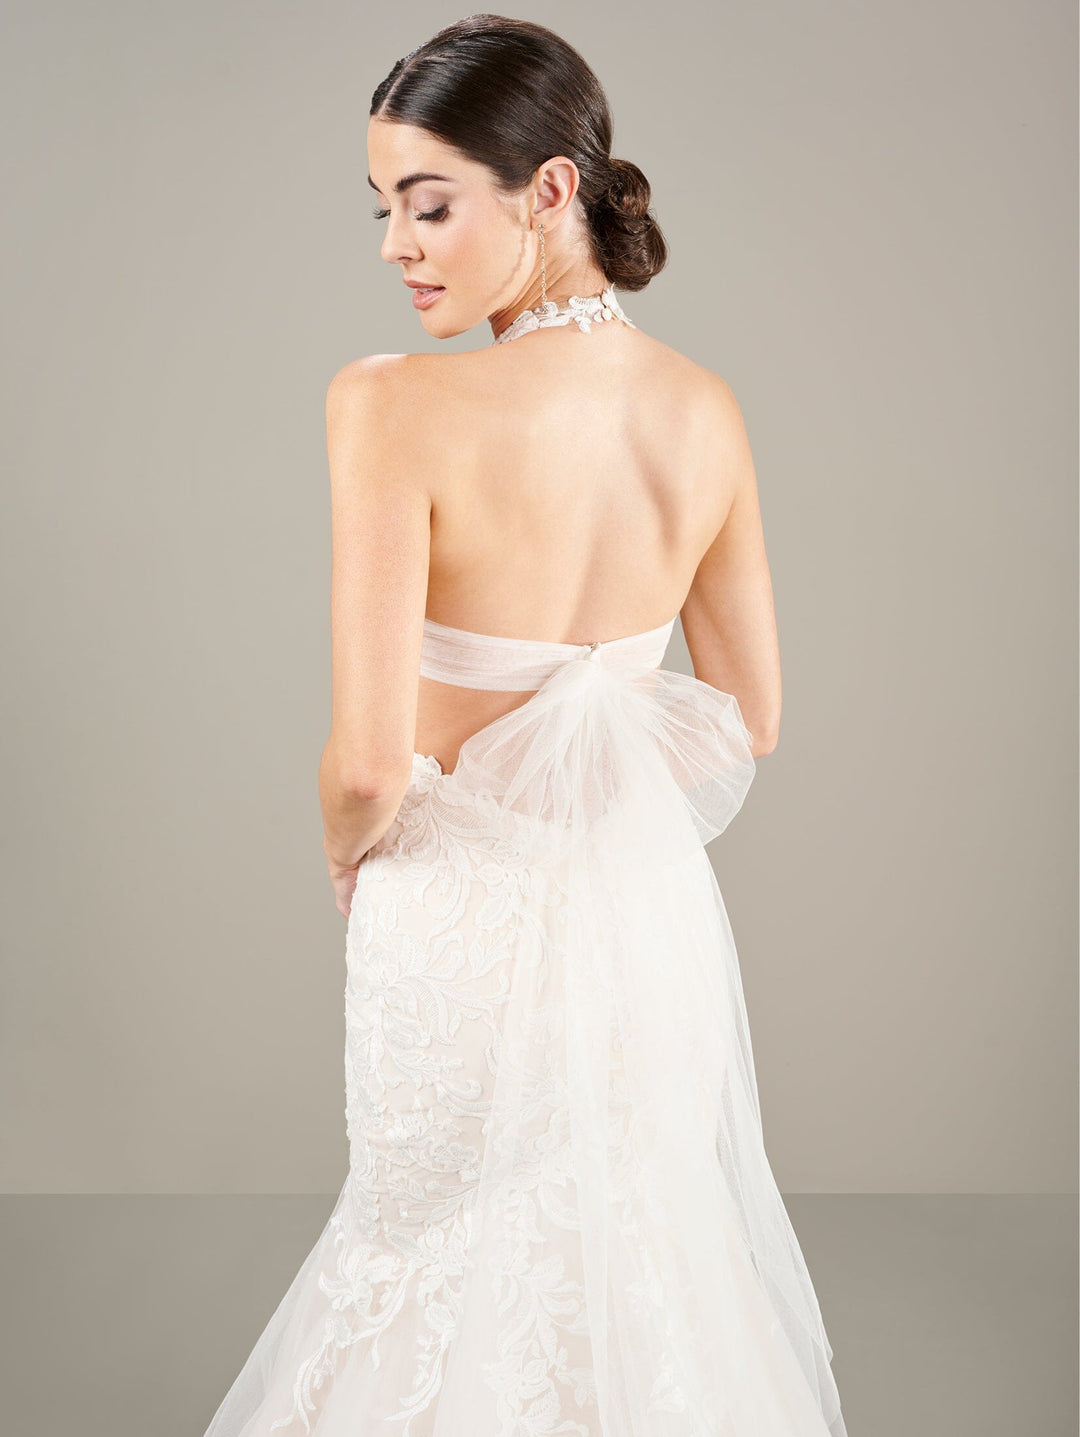 Applique Halter Mermaid Bridal Gown by Adrianna Papell 31284